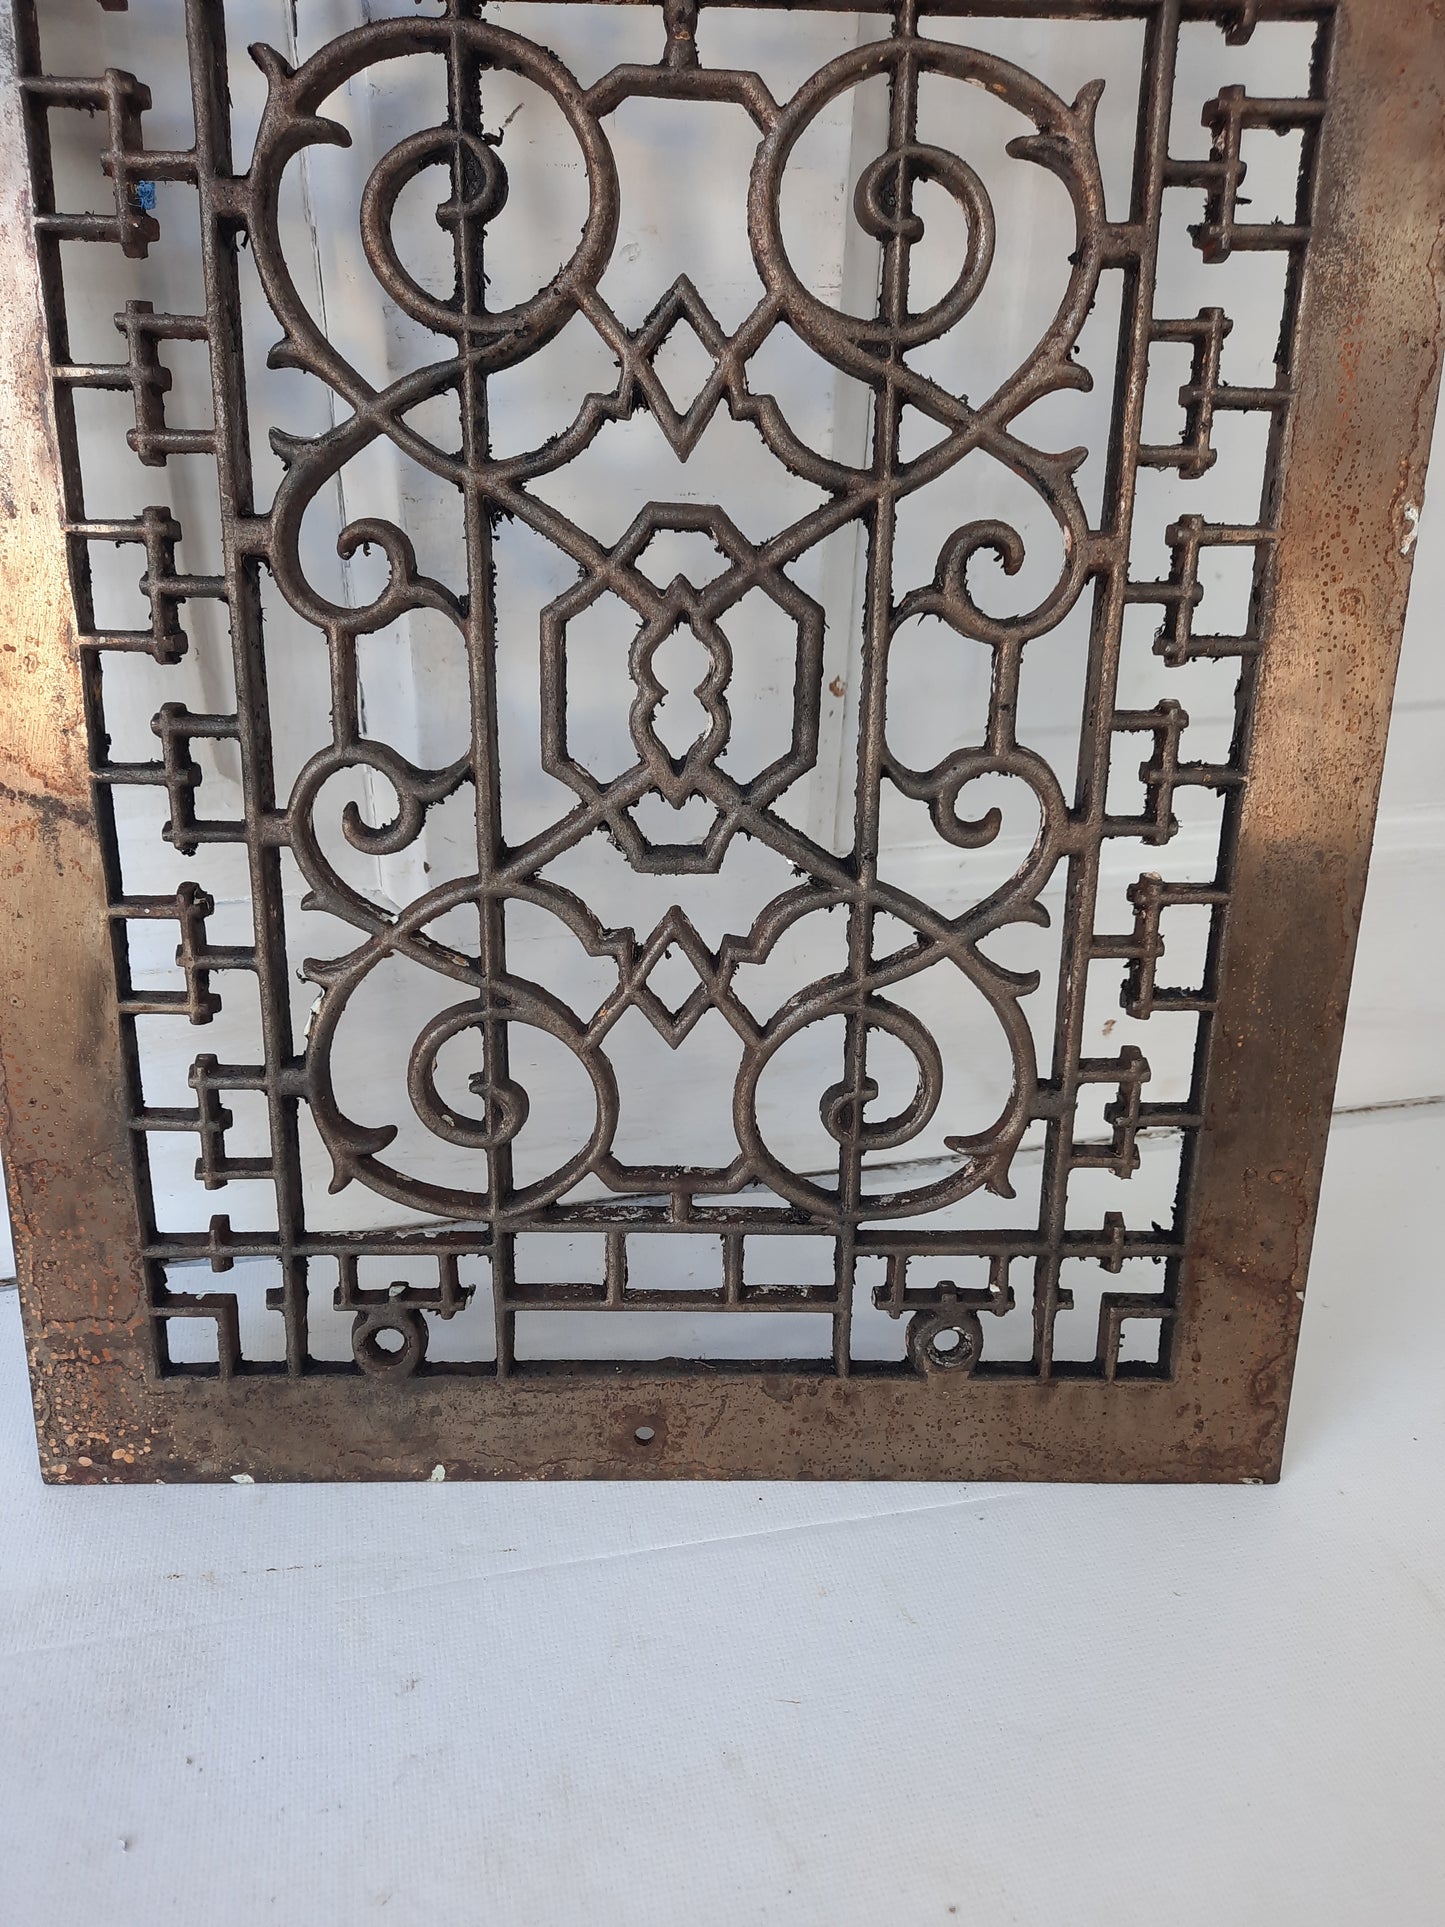 11 x 14 Antique Cast Iron Vent Cover, Floor Register Cover with Scroll Design #010203